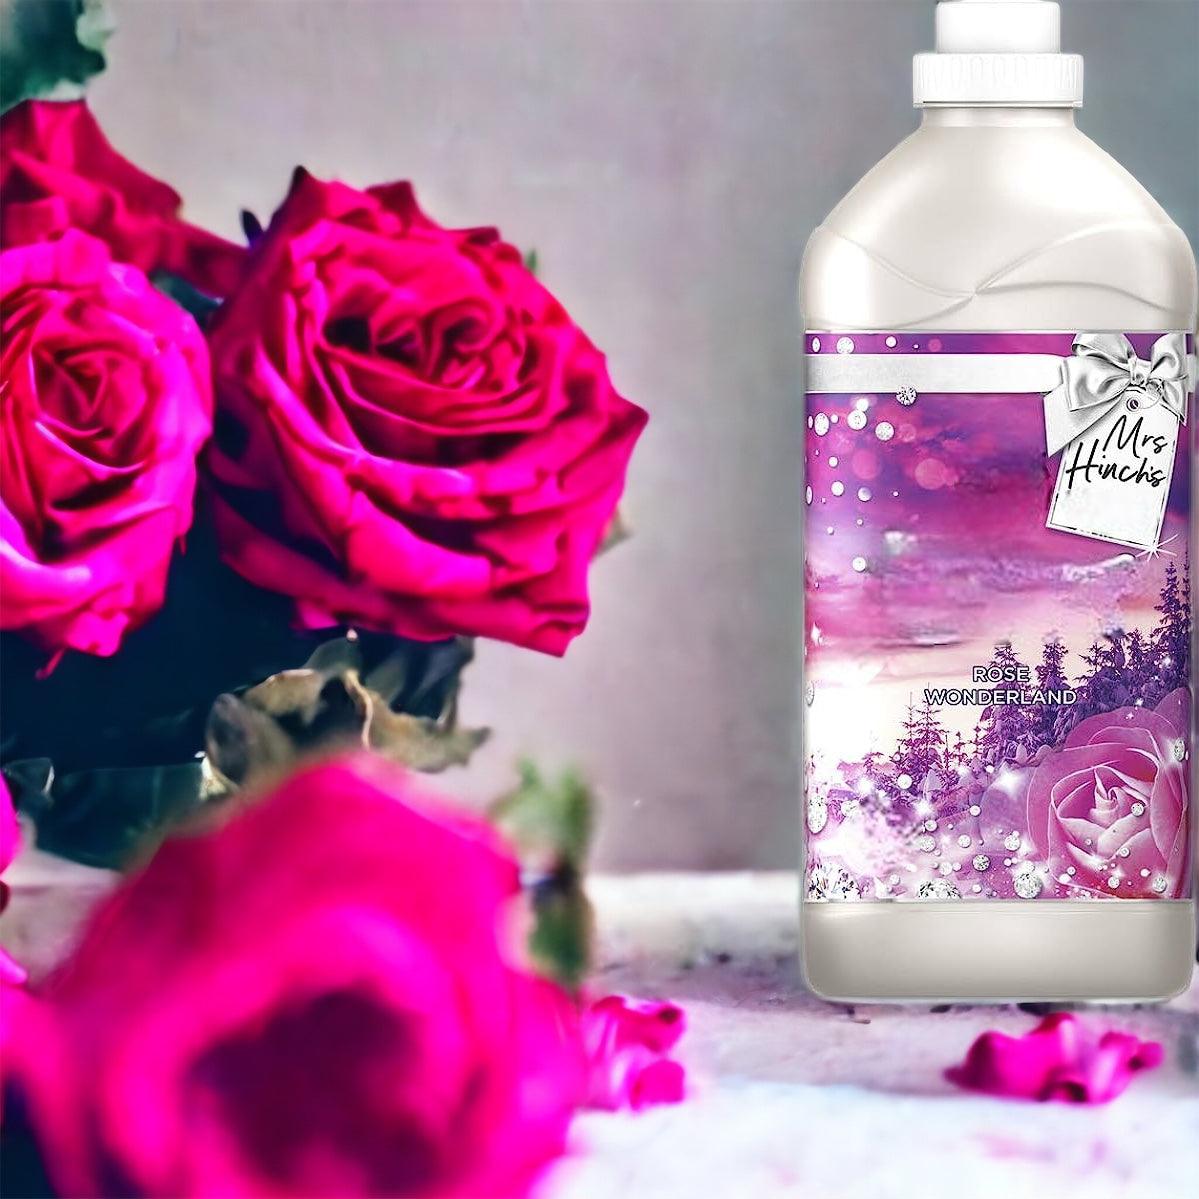 Rose Wonderland Fragrance Oil - Craftiful Fragrance Oils - Supplies for Wax Melts, Candles, Room Sprays, Reed Diffusers, Bath Bombs, Soaps, Perfumes, Bath Salts and Body Sprays